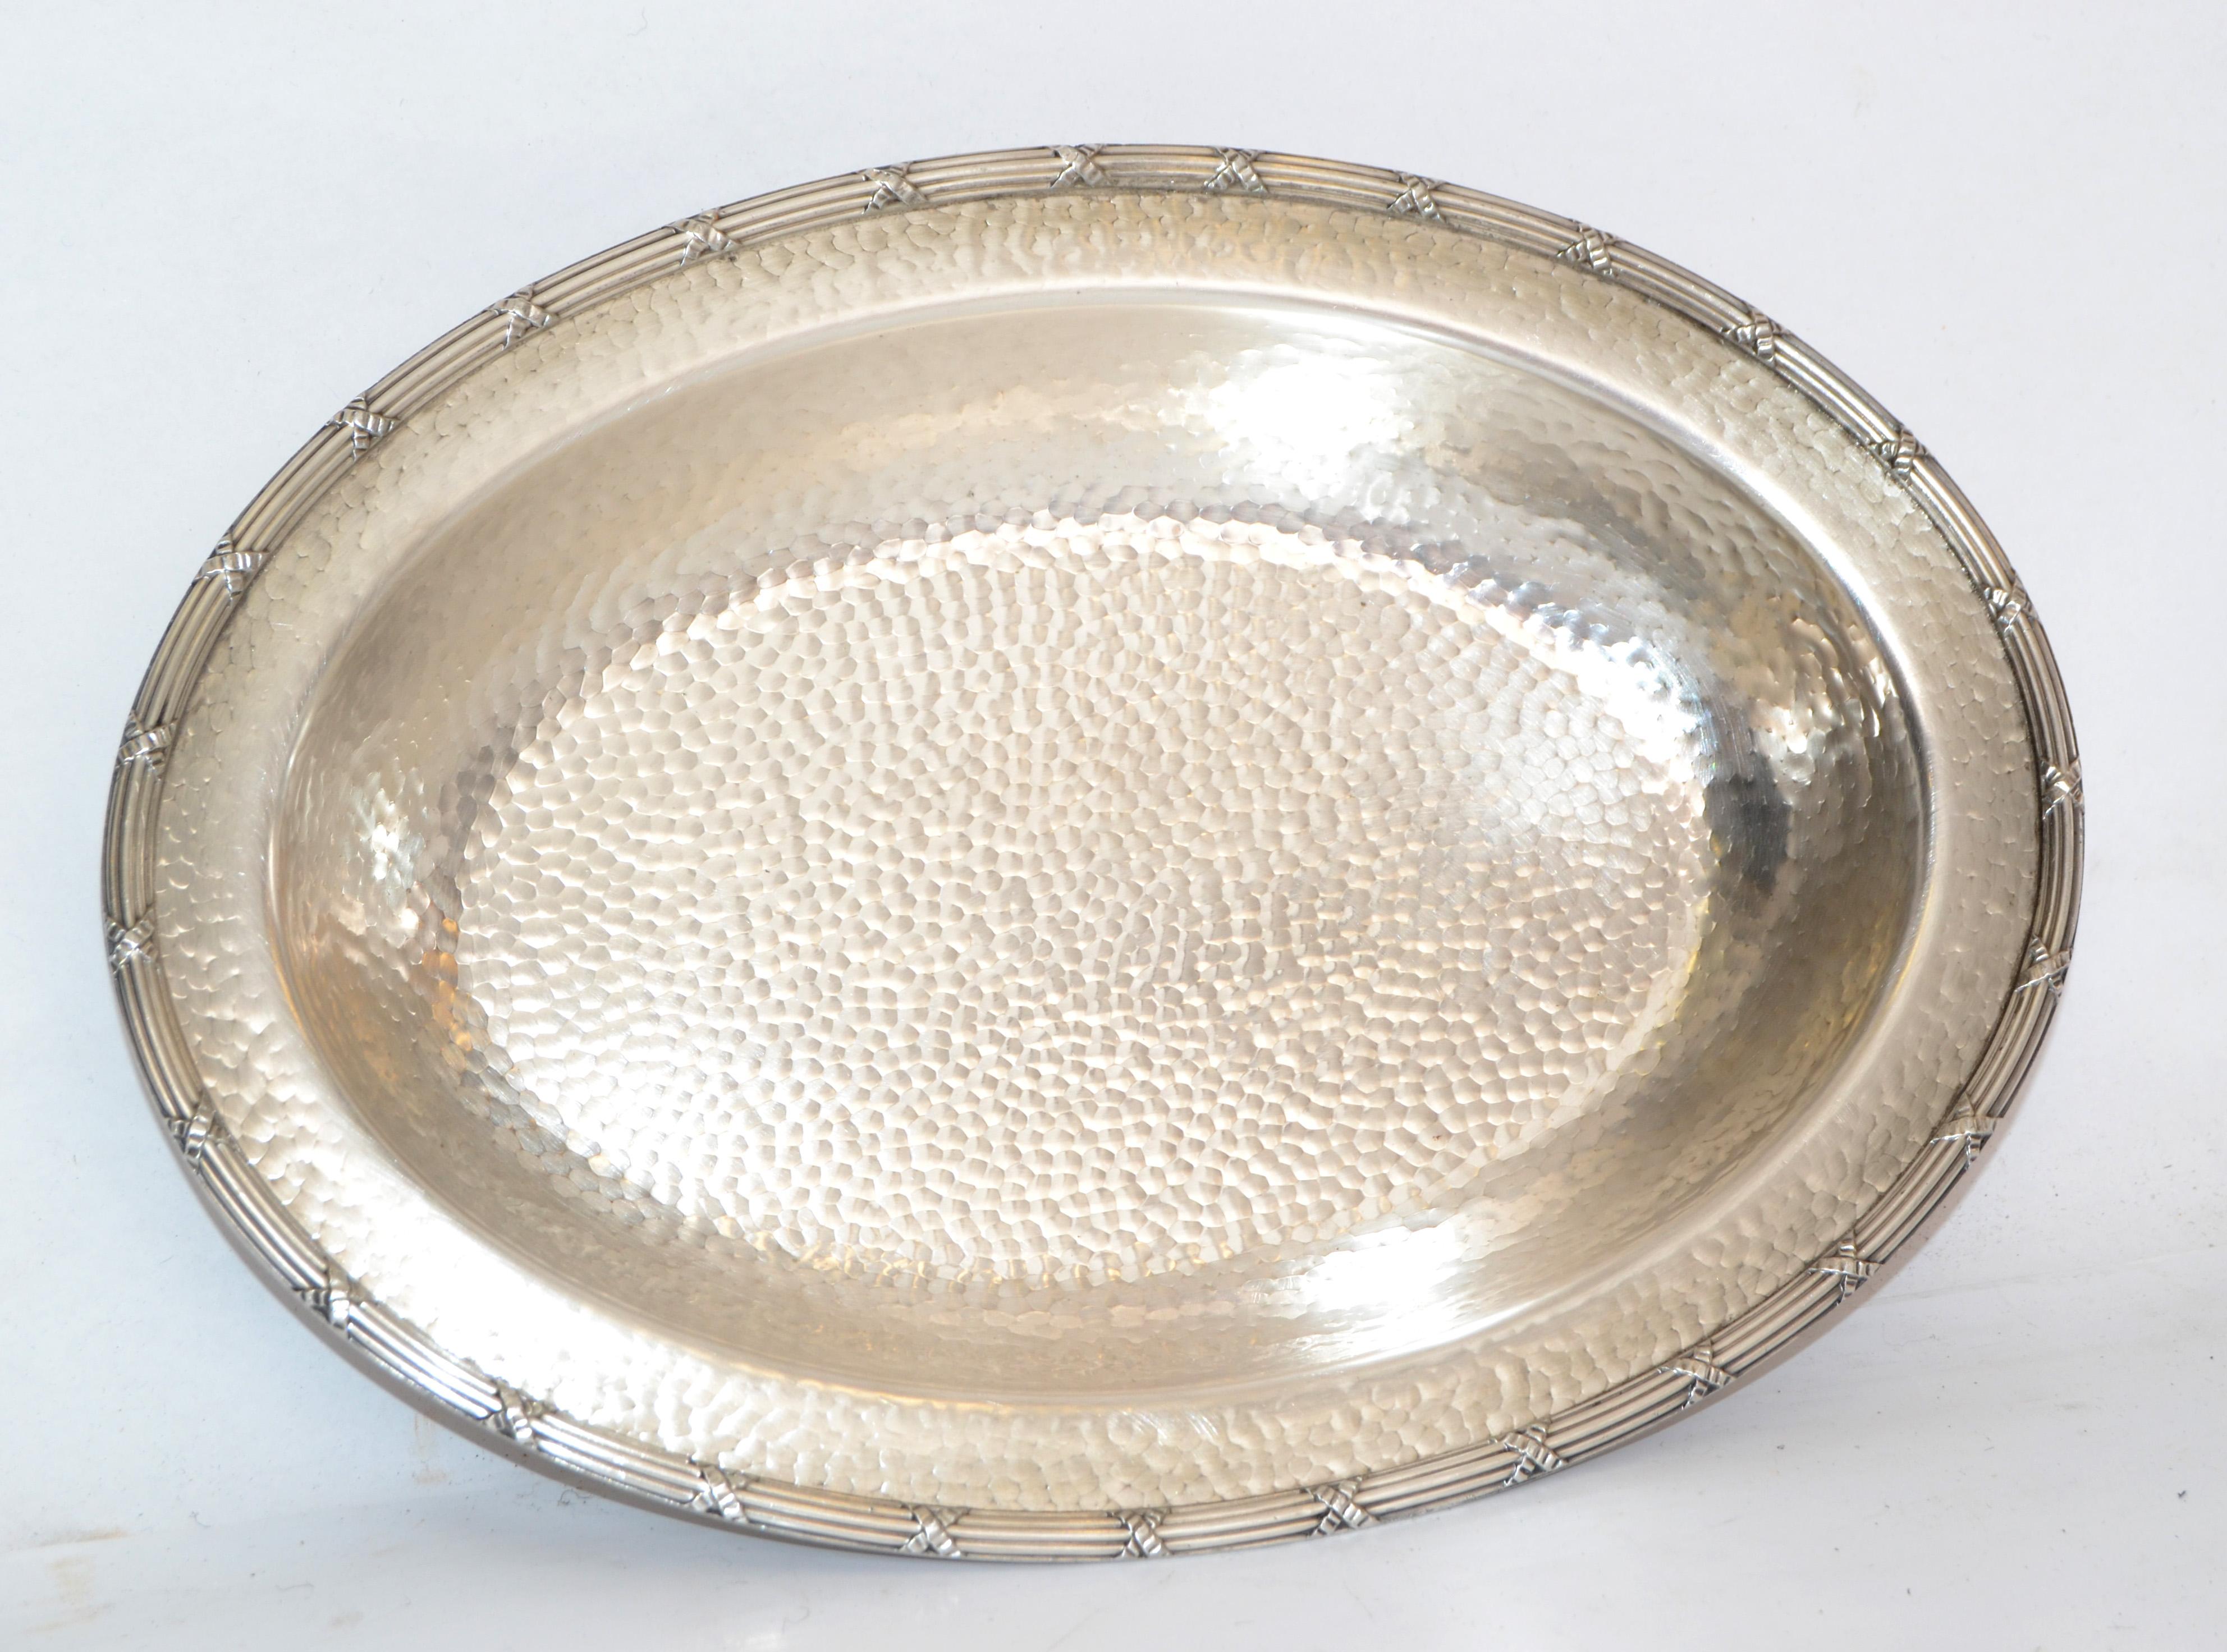 American Art Deco 1969 Hand-Hammered Silver Plate EPNS 2245 Centerpiece Decorative Bowl For Sale